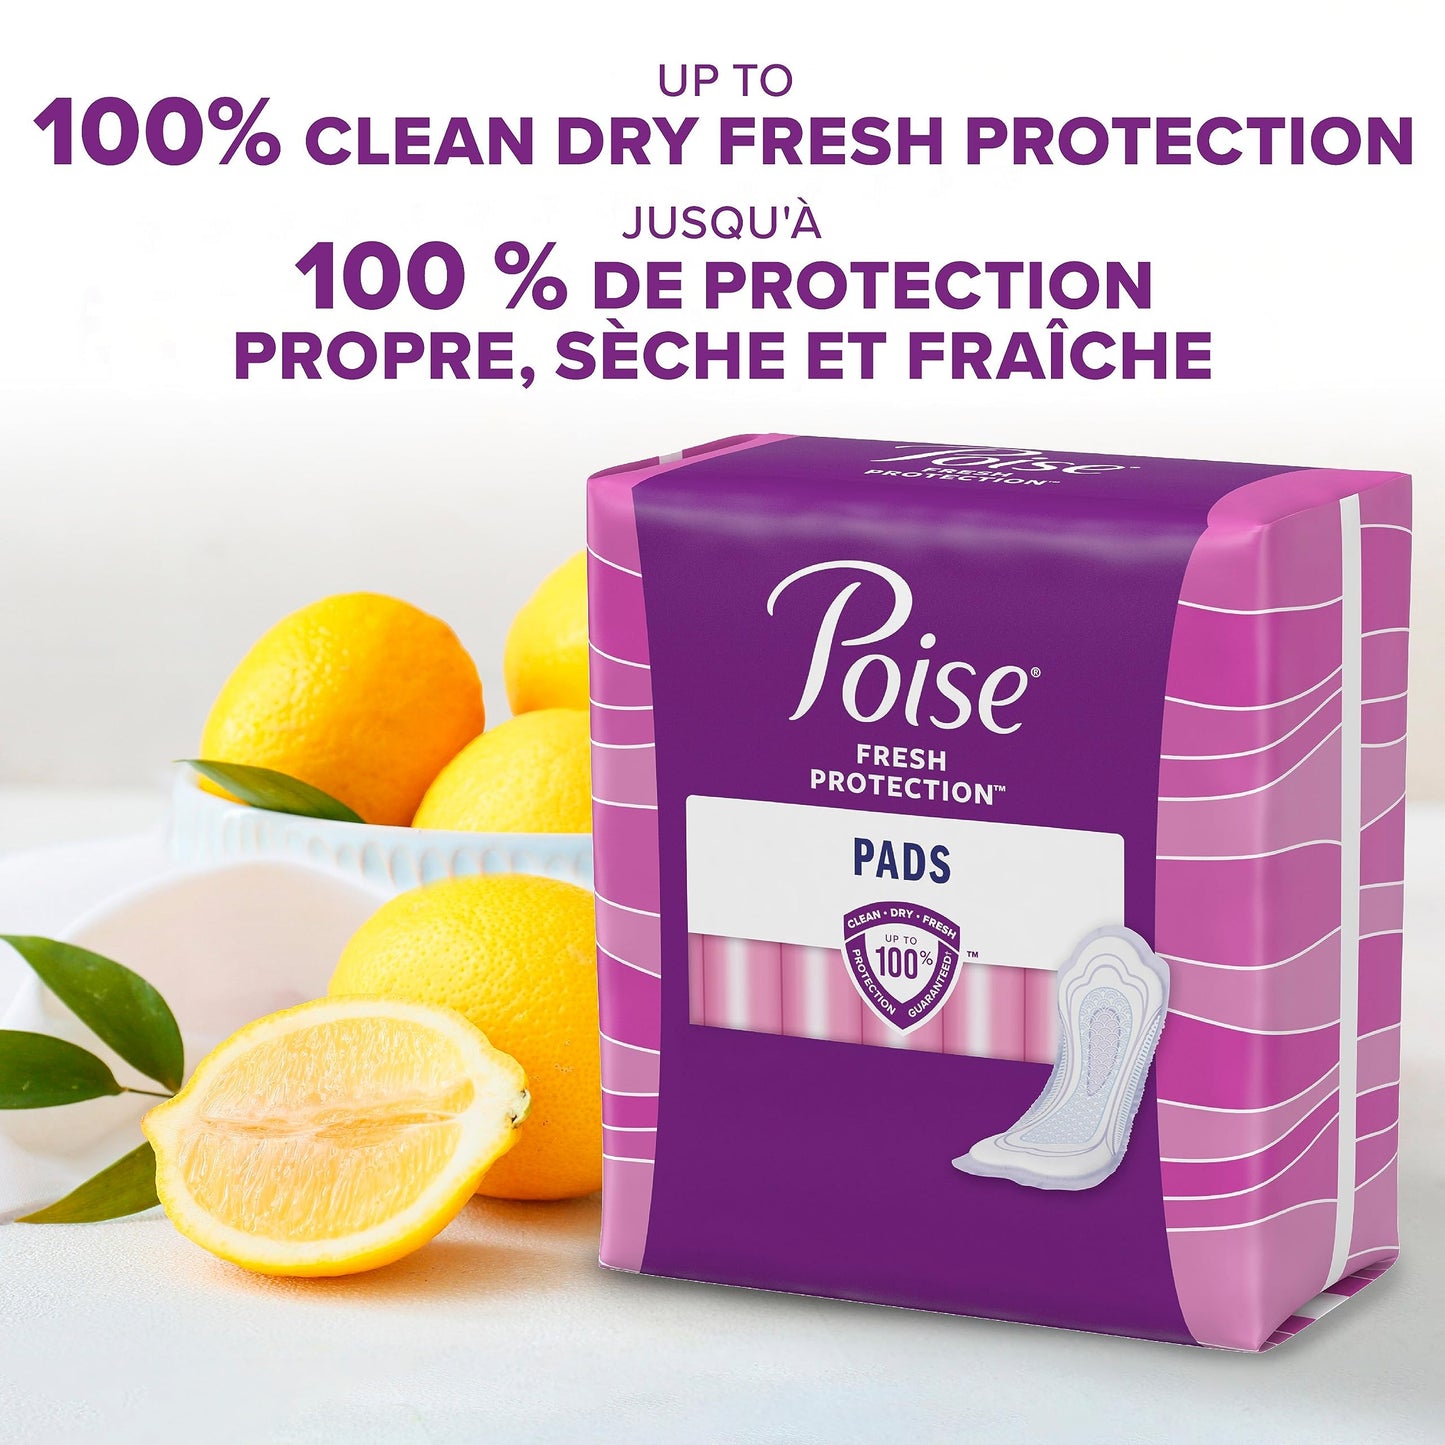 Poise Incontinence Pads for Women, Ultimate Absorbency, Long, Original Design, 108 Count (4 Packs of 27)